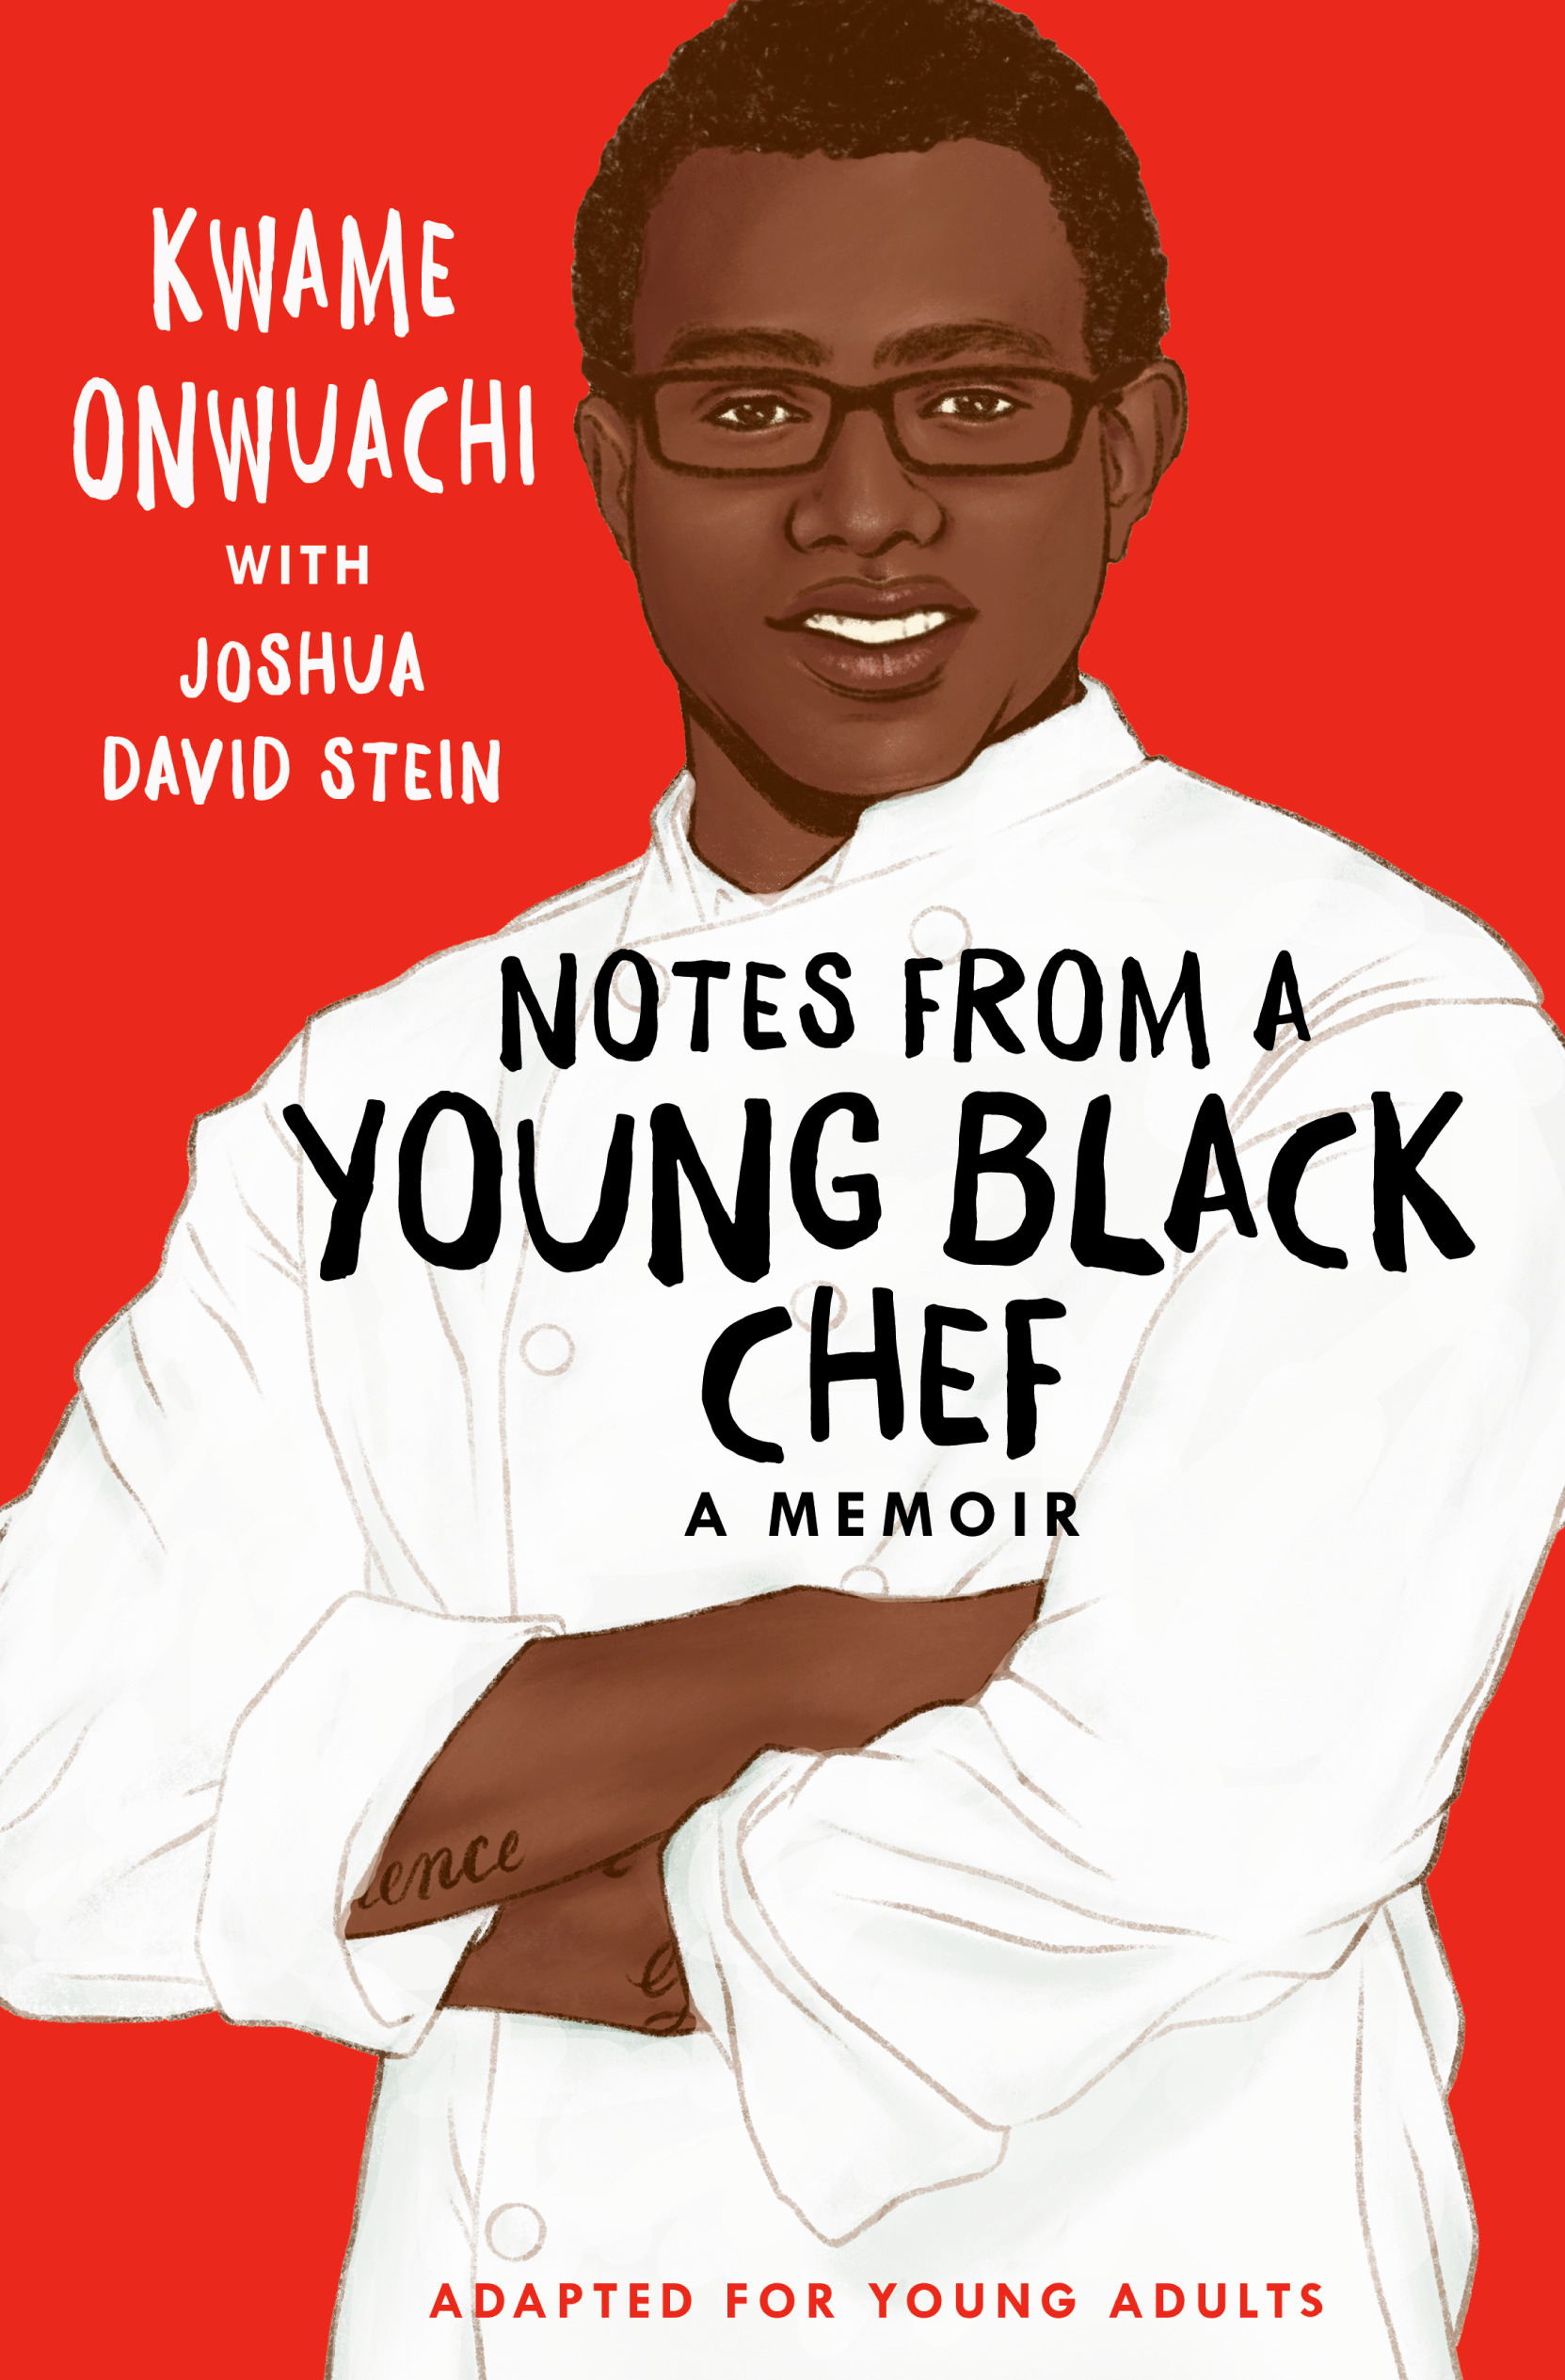 Notes from a Young Black Chef (Adapted for Young Adults) | Young adult